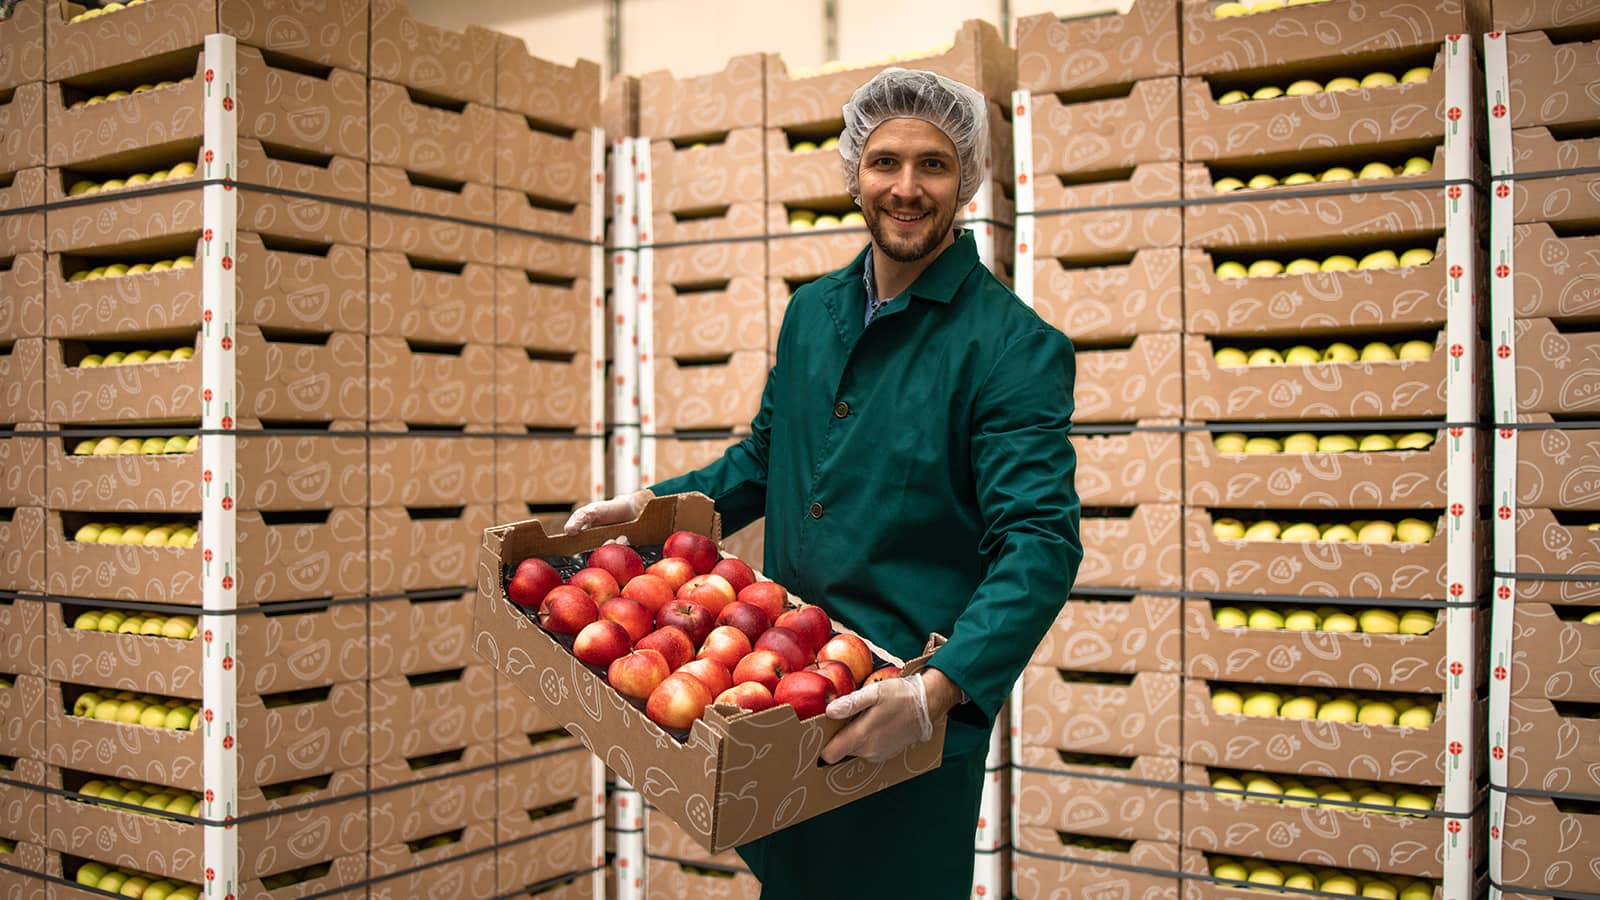 Portrait of worker holding crate full of red apples in organic food factory warehouse